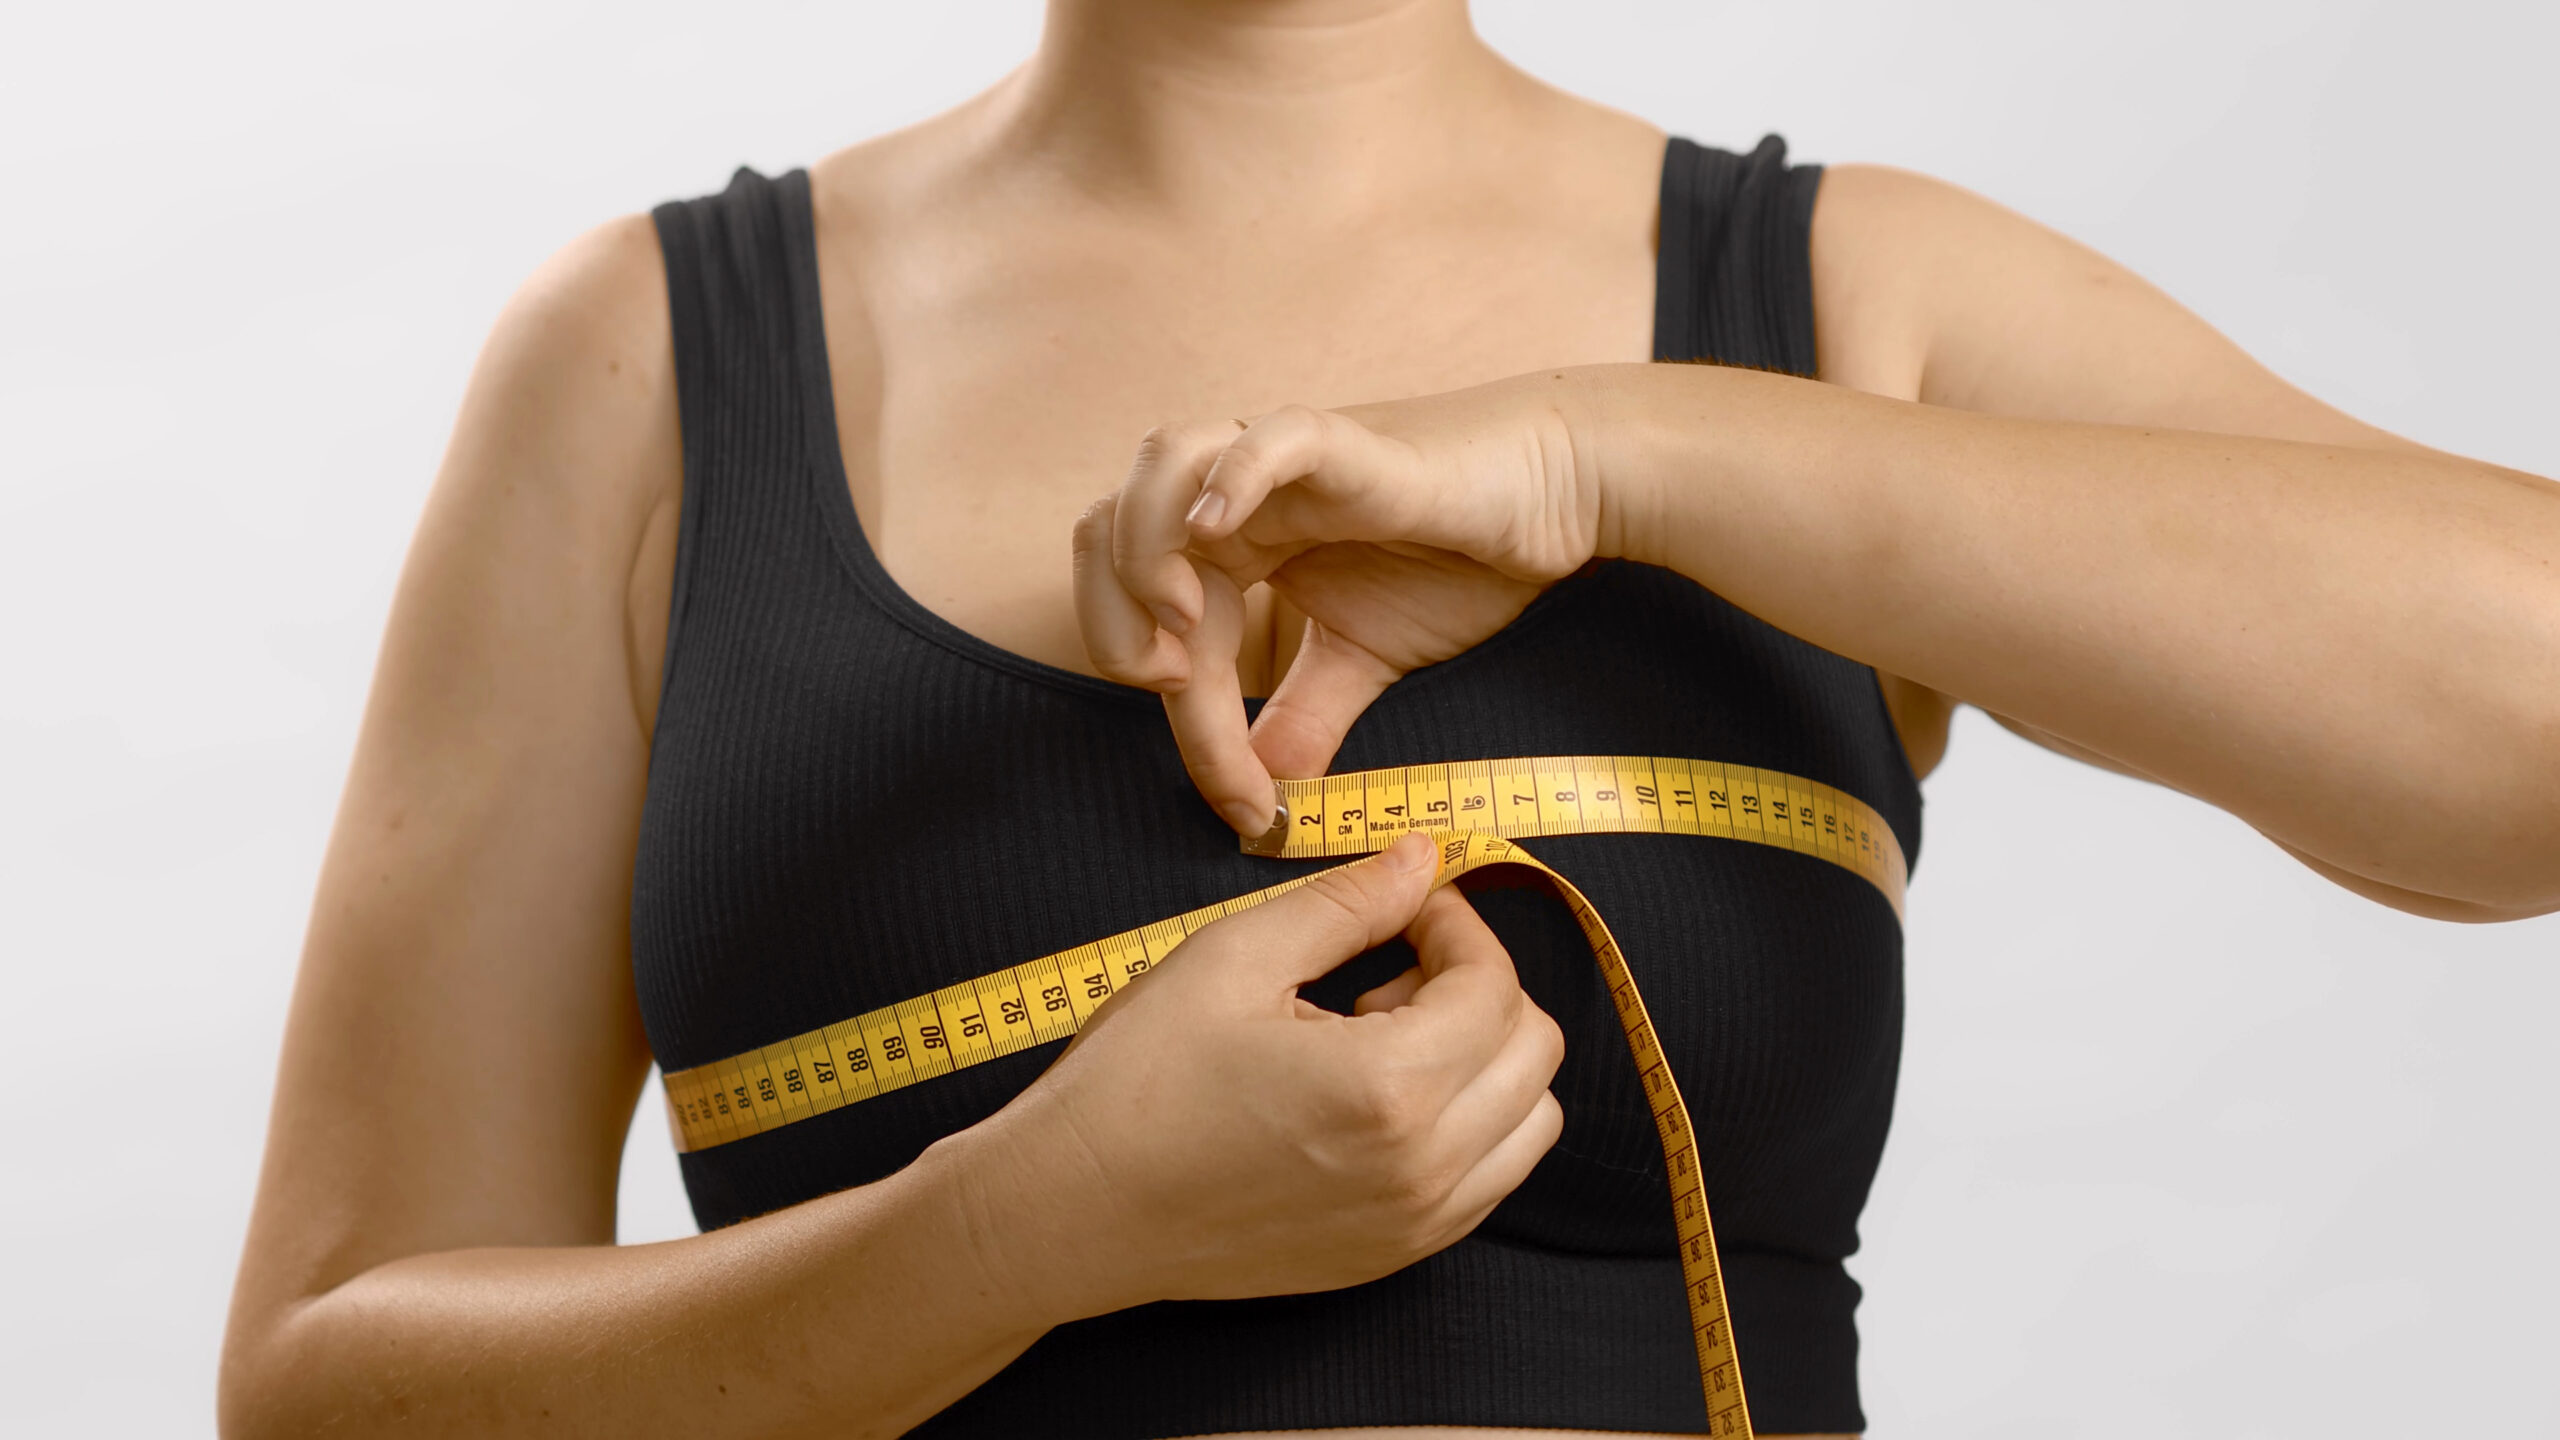 breast reduction size